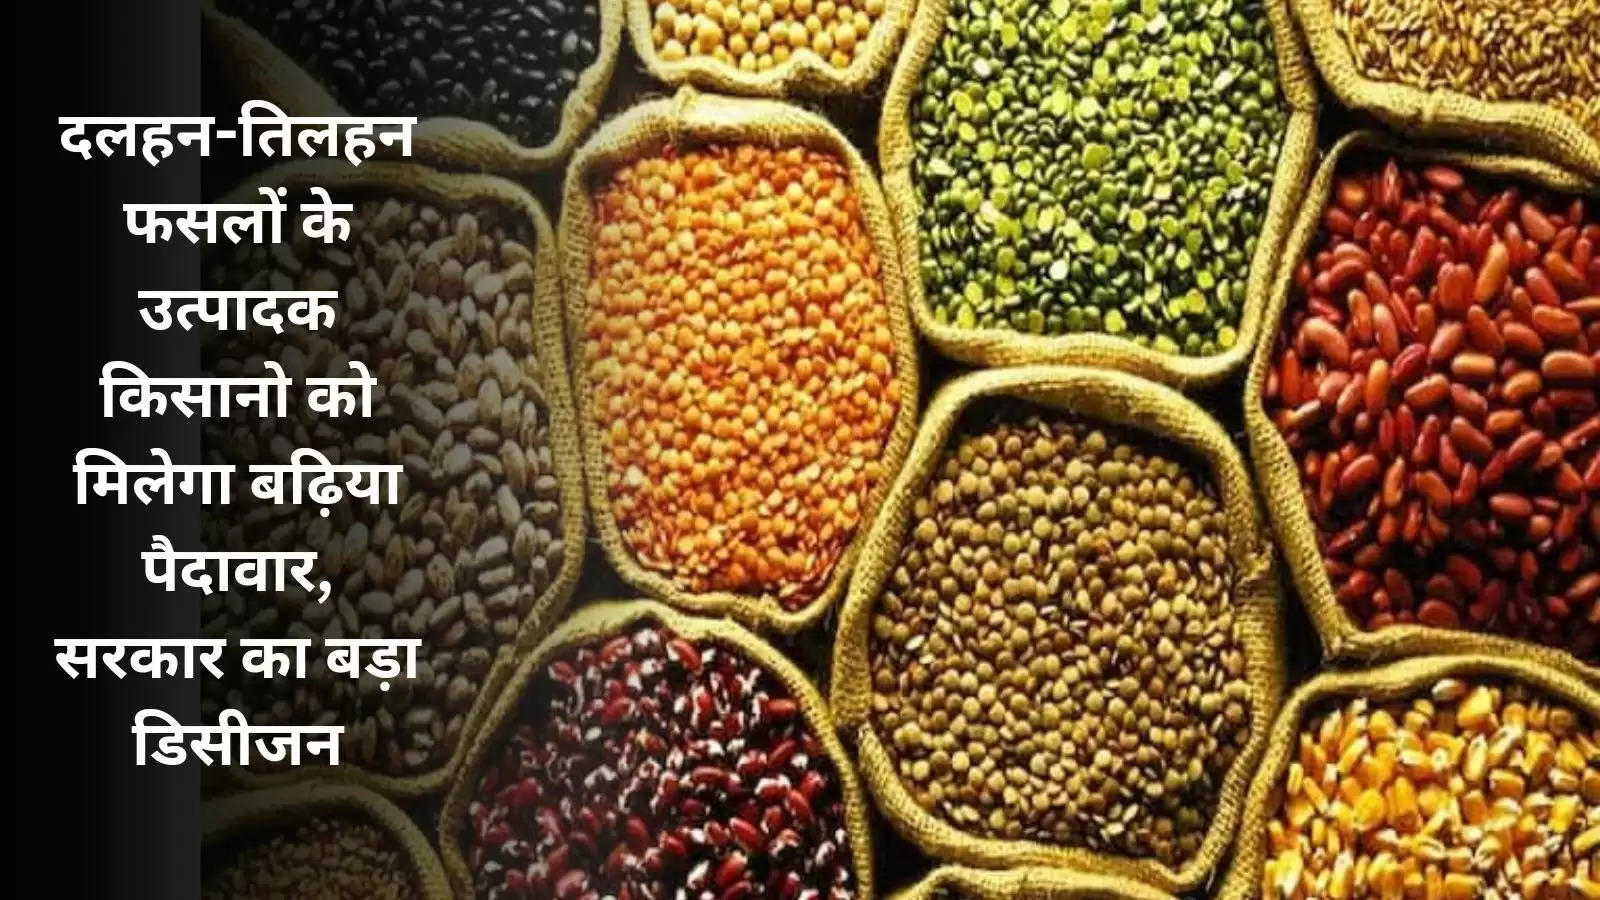 government-decided-to-distribute-pulses-and-oil-seeds